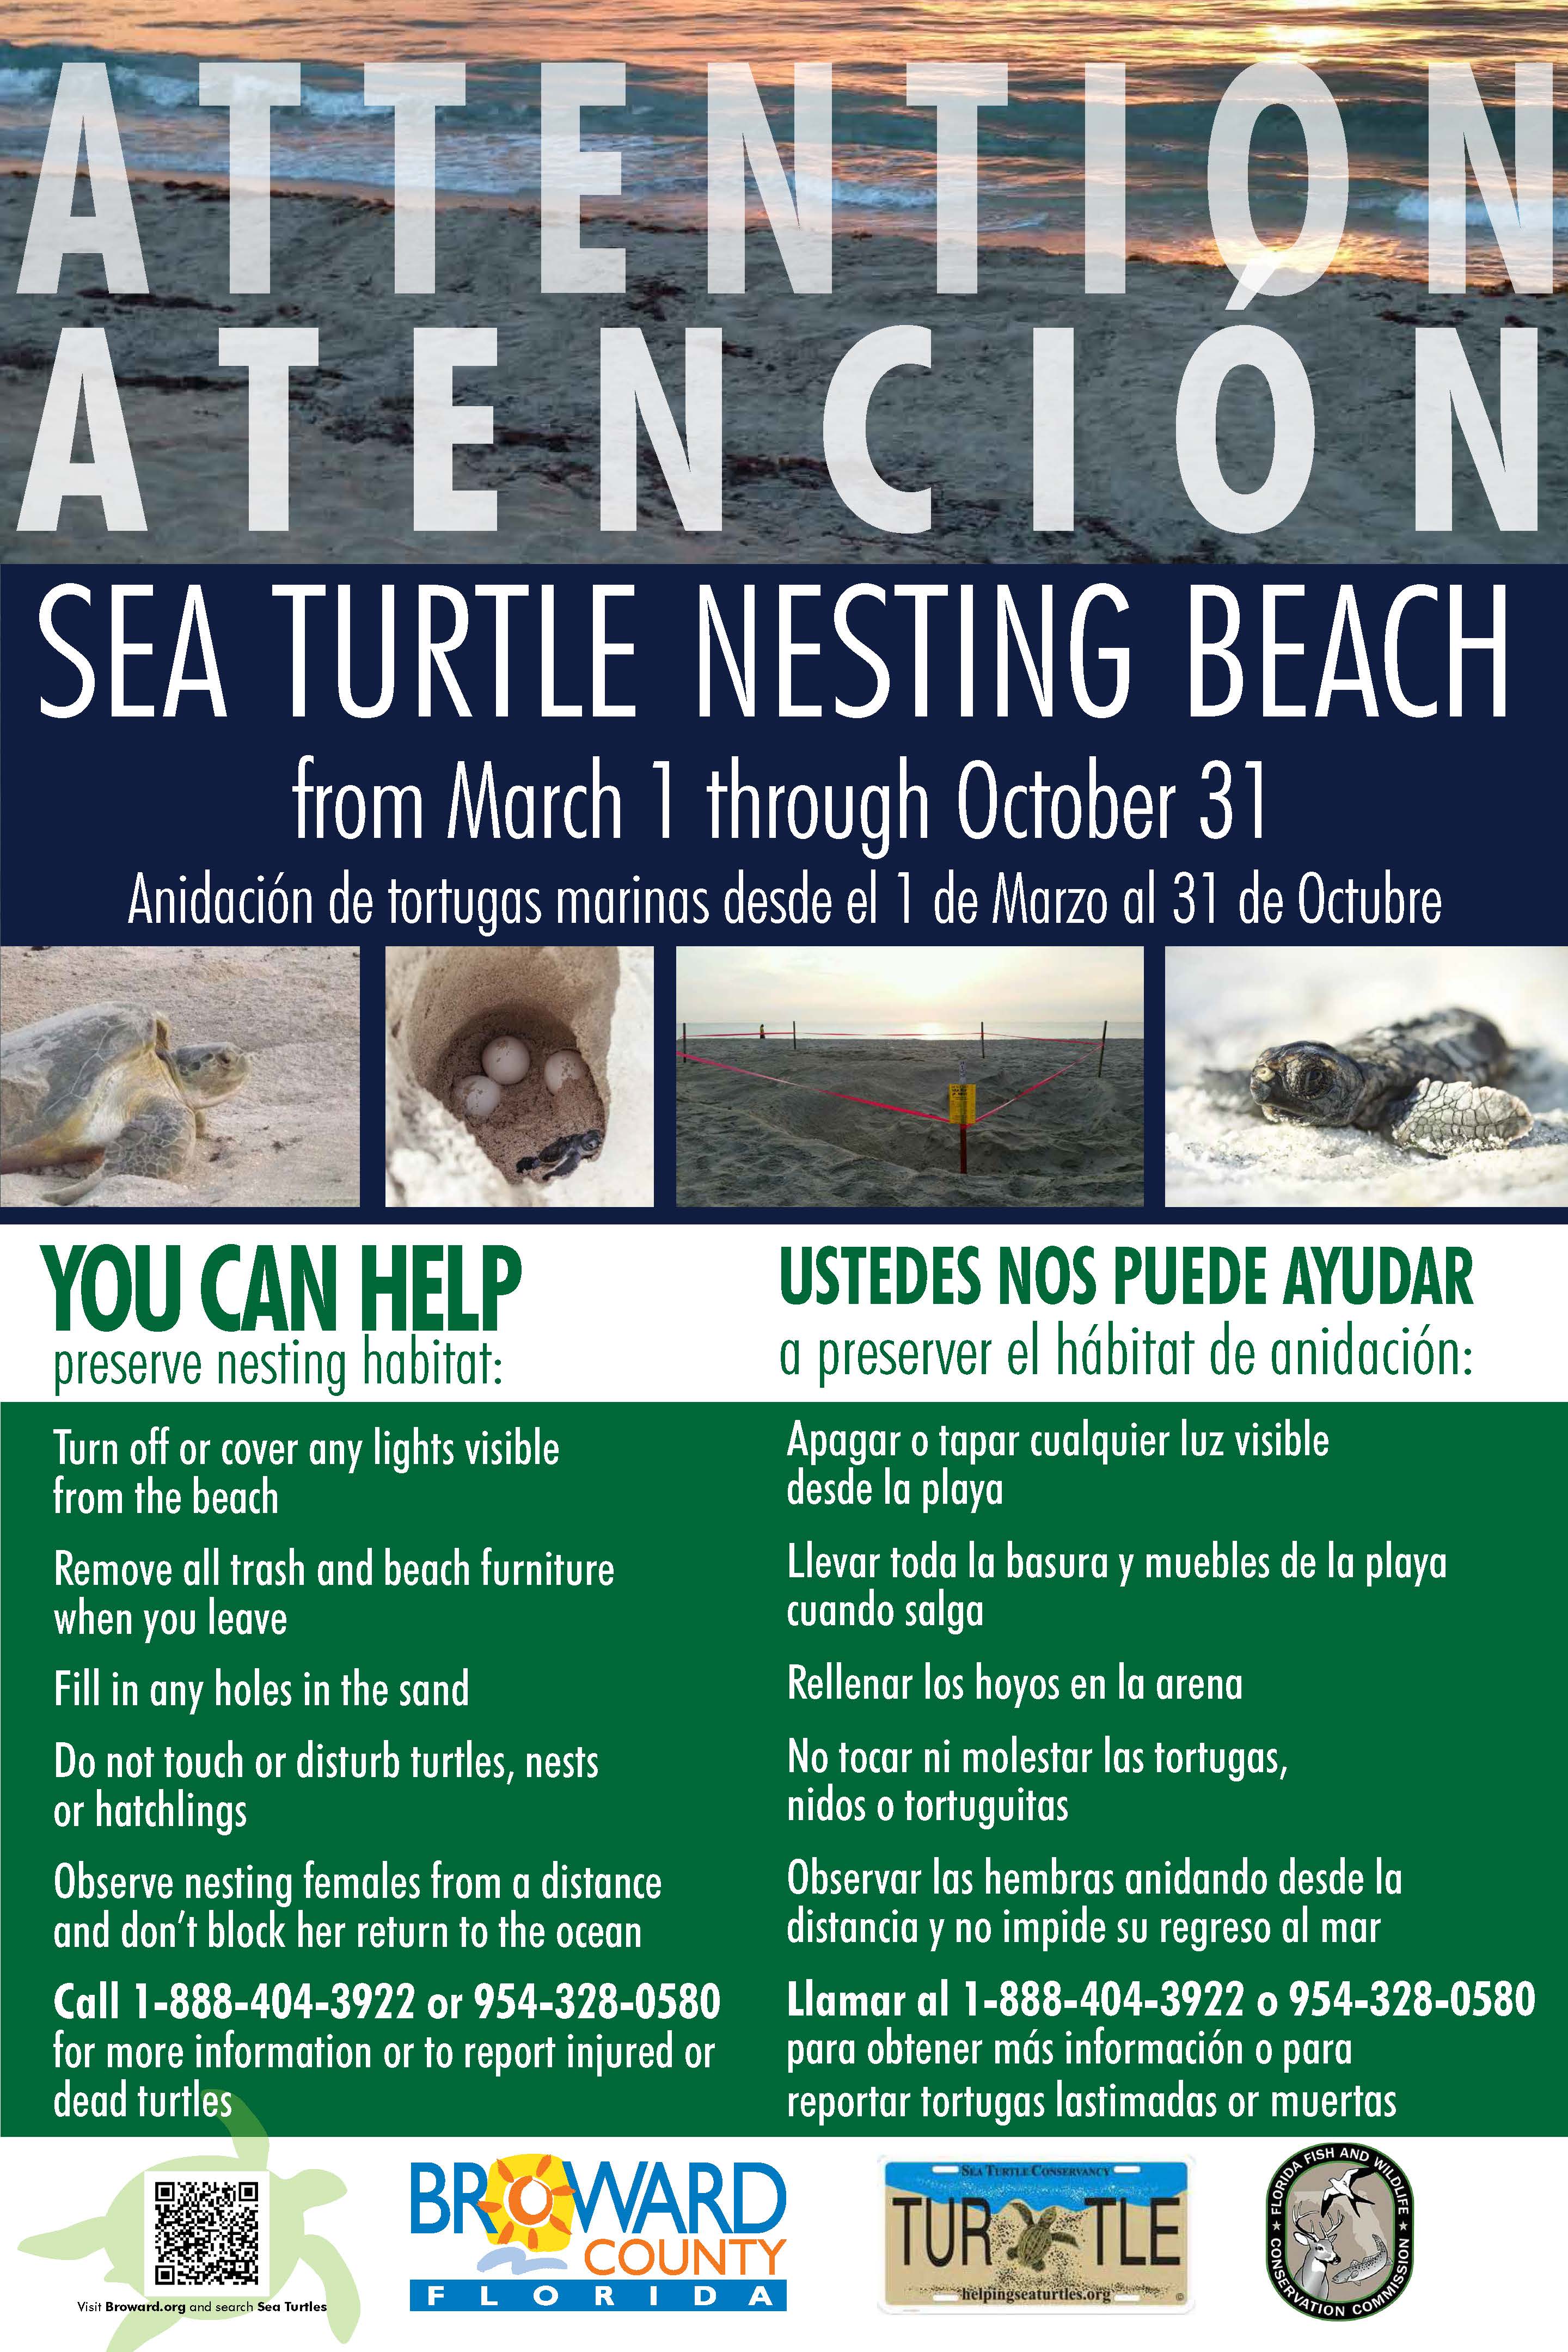 6 Ways You Can Protect Sea Turtles